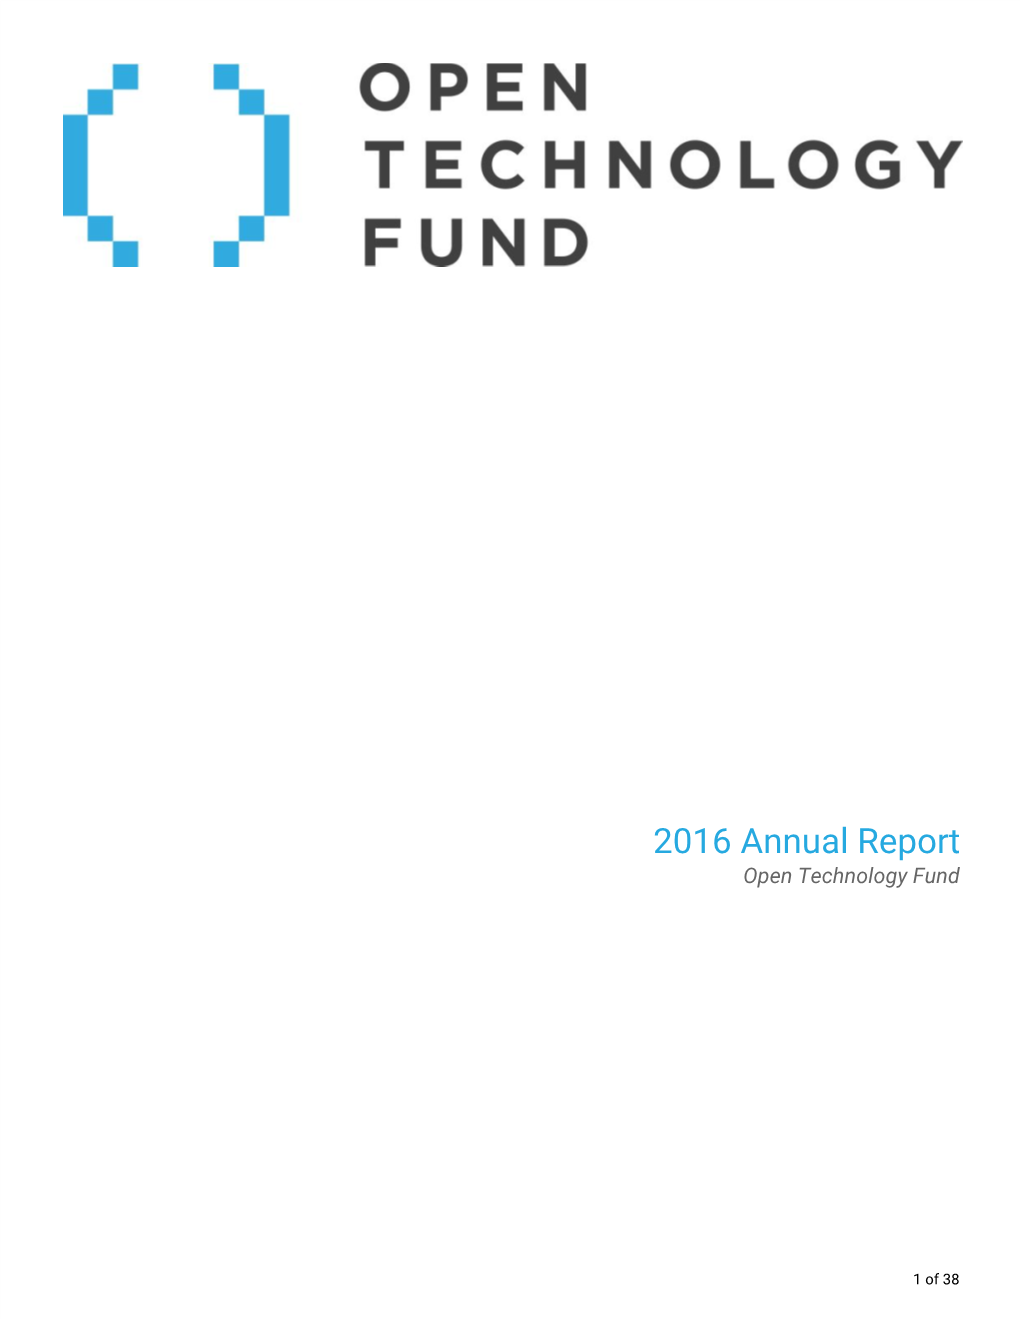 2016 Annual Report Open Technology Fund